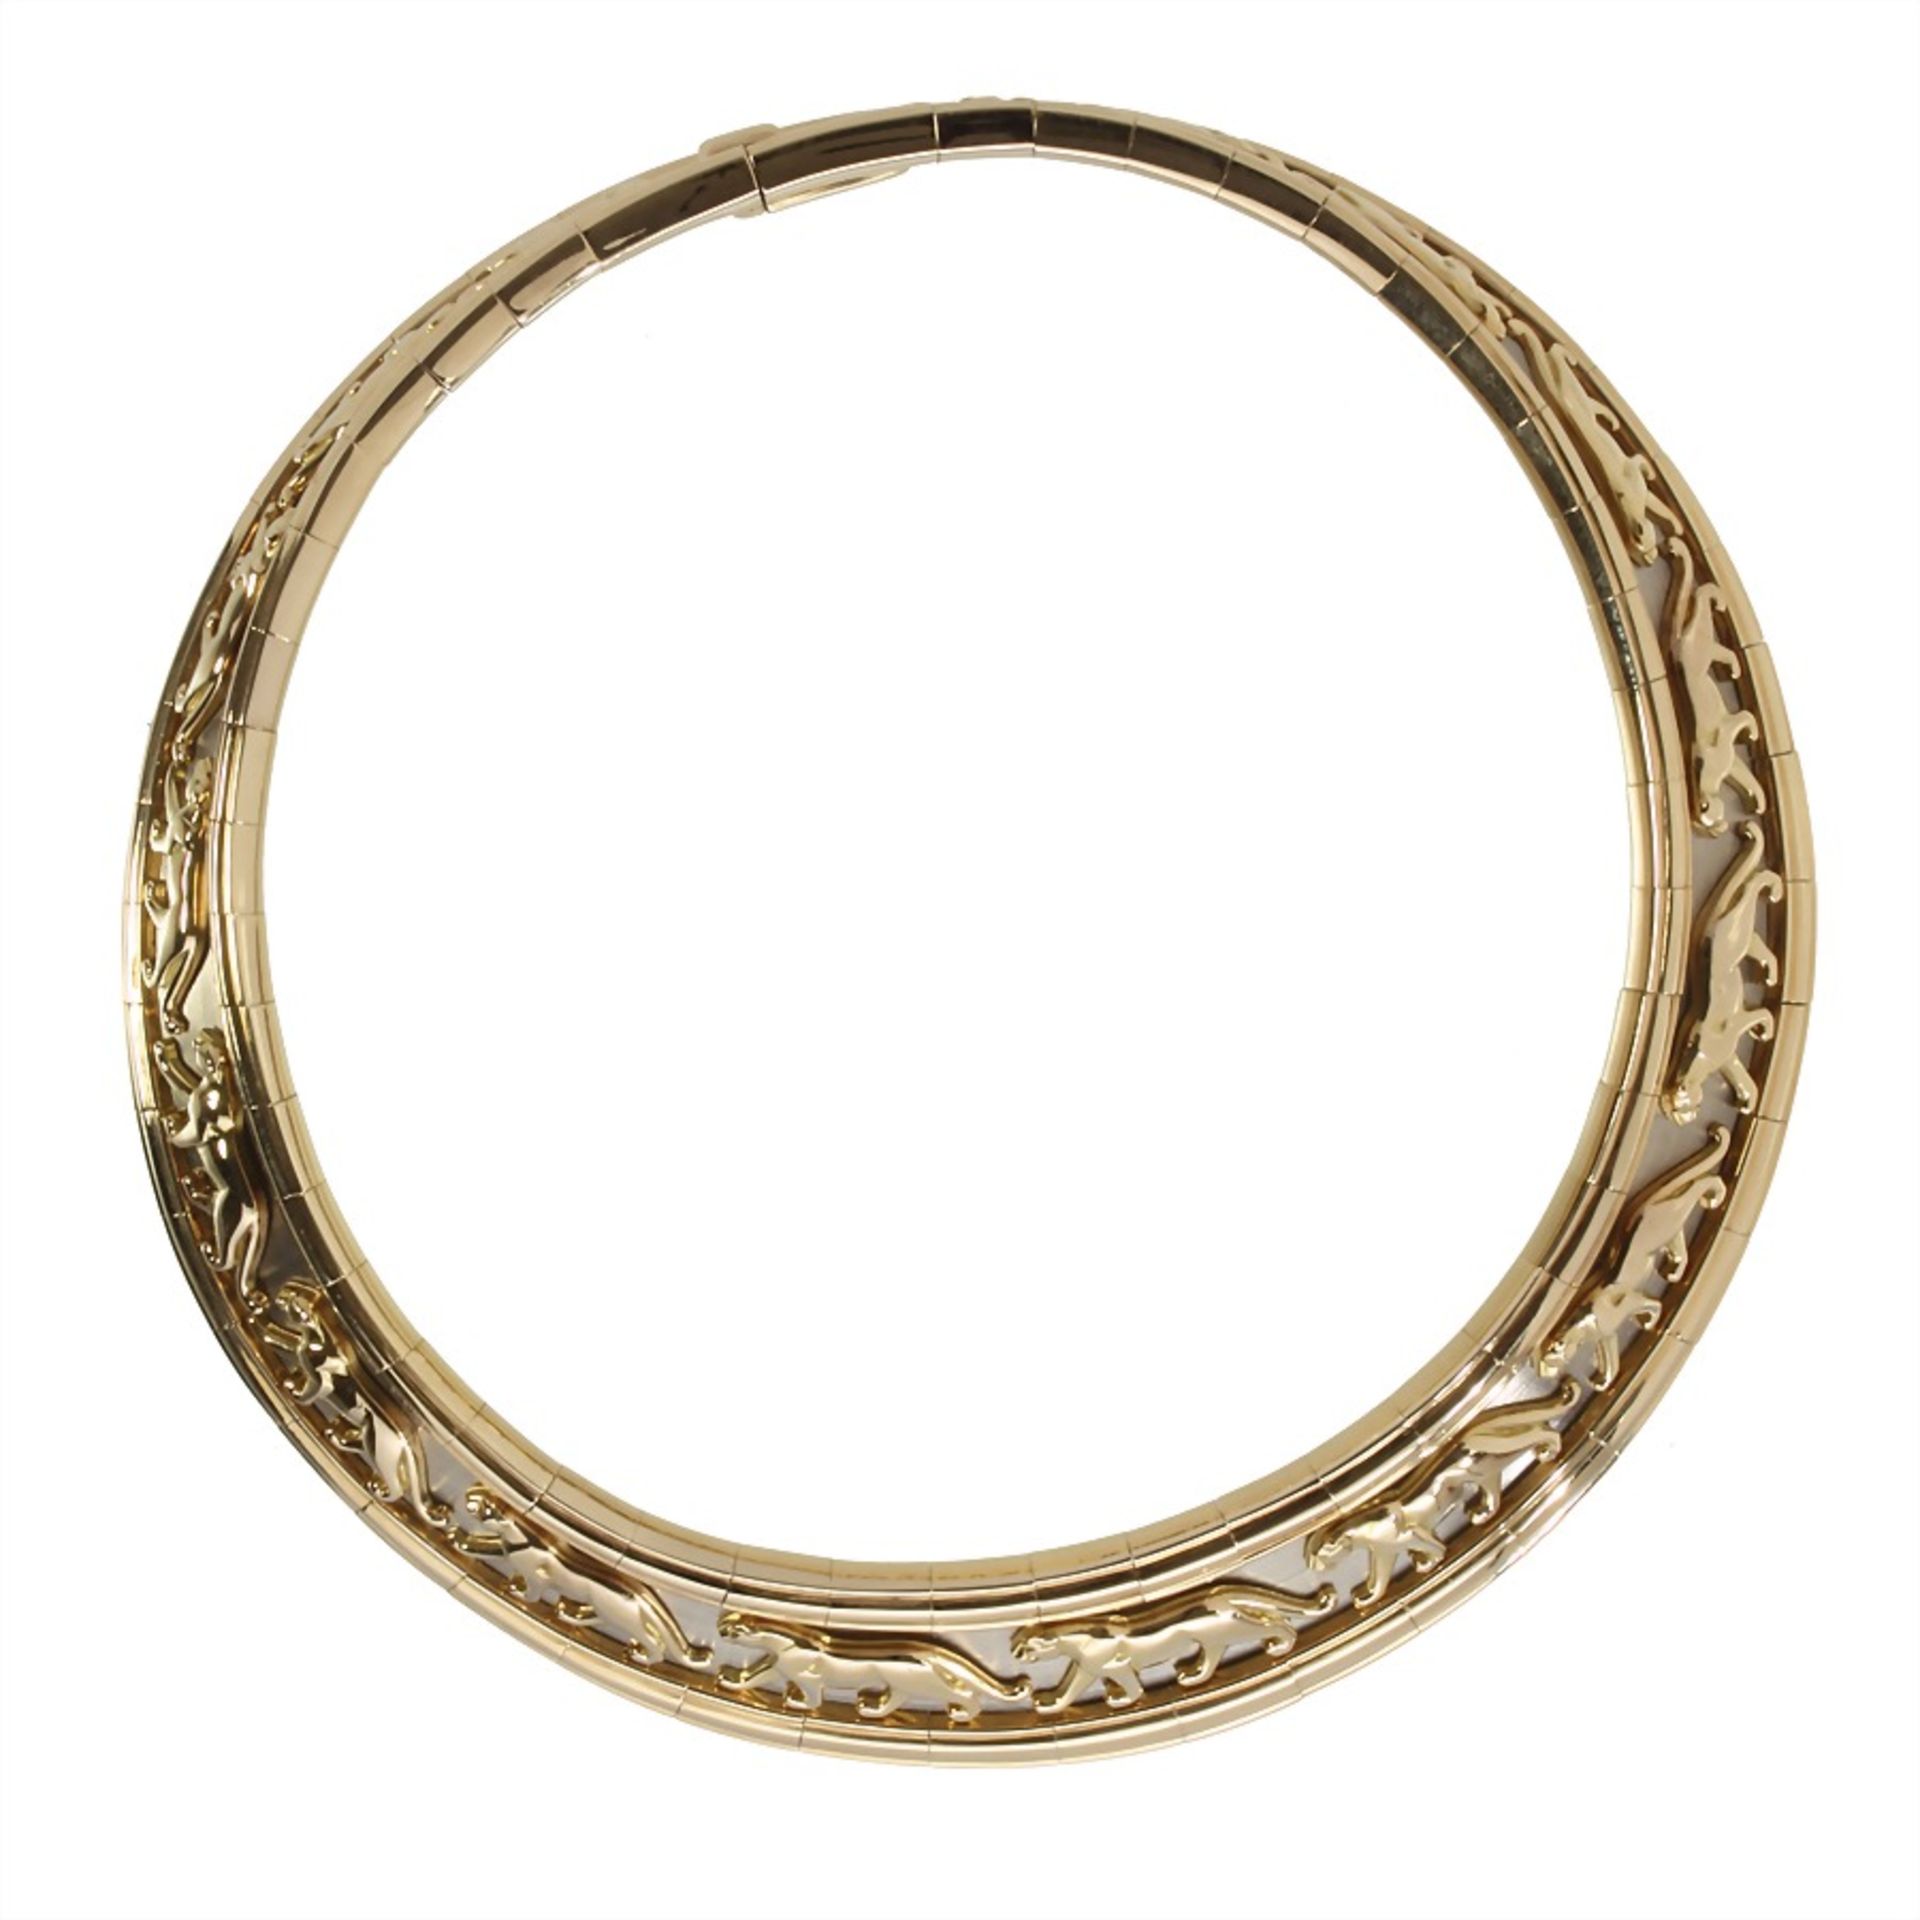 pharaoh-necklace, CARTIER Model Panthère, yellow gold/white gold 750/000, signed 68359 Cartier ... - Image 2 of 2